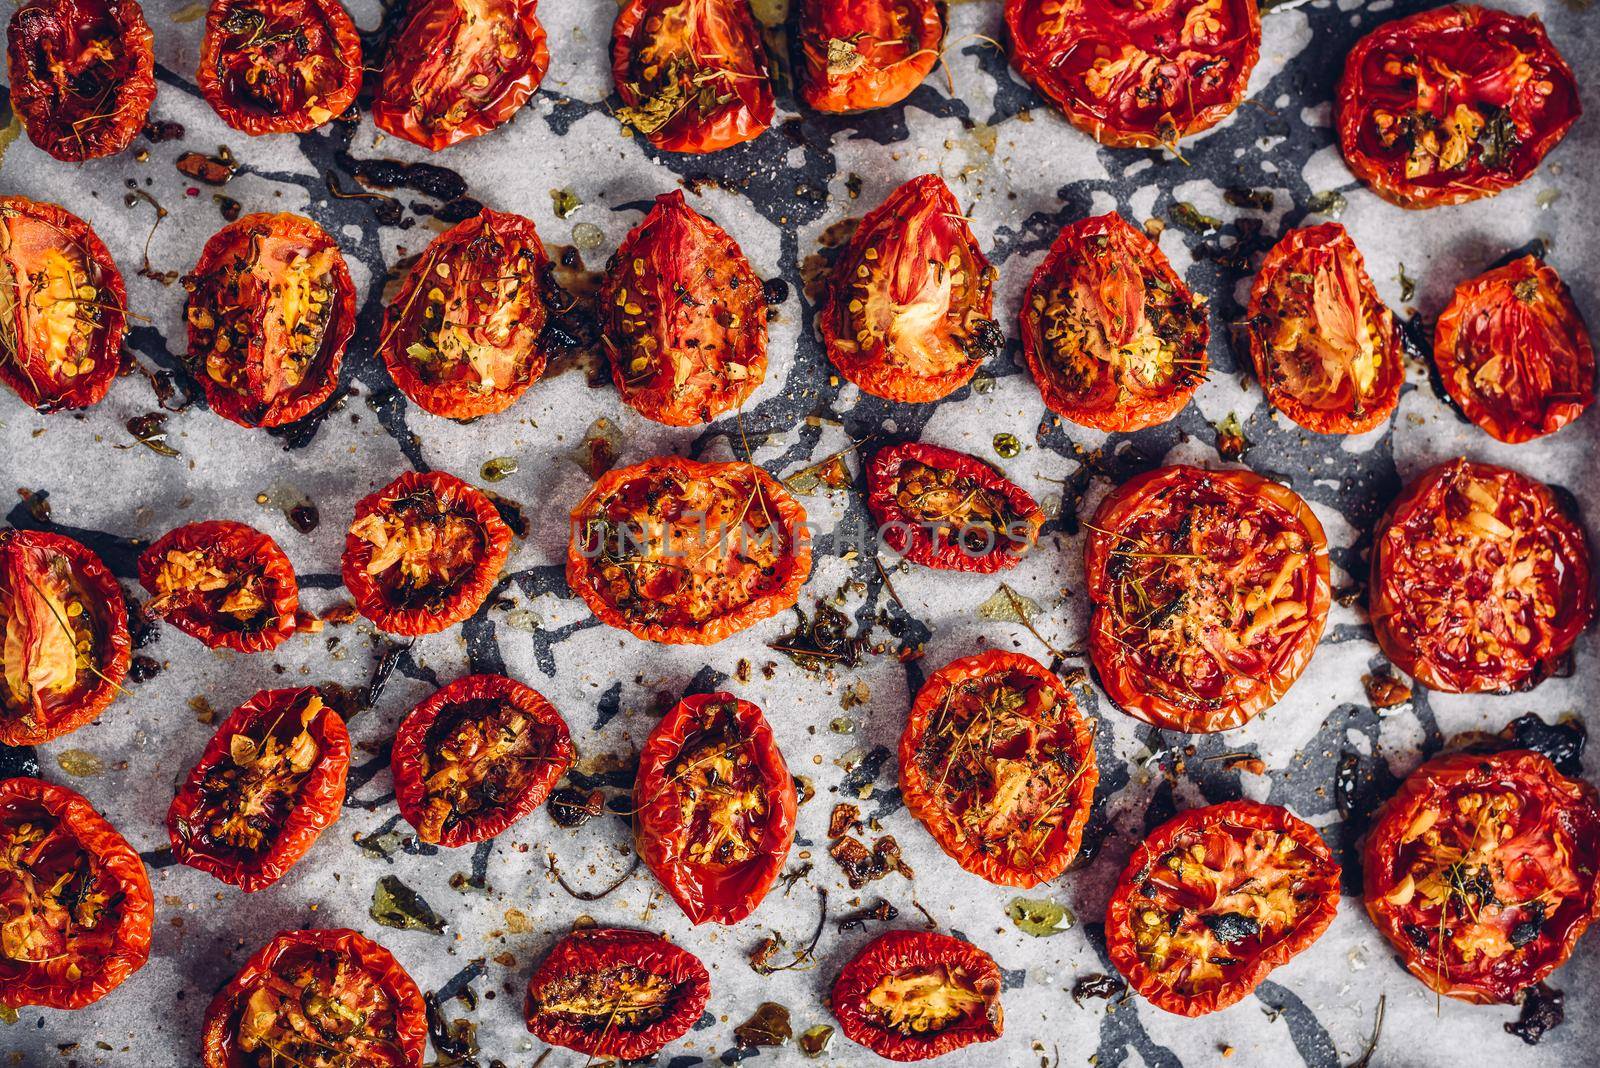 Prepared Sun Dried Tomatoes with Herbs on Parchment Paper by Seva_blsv